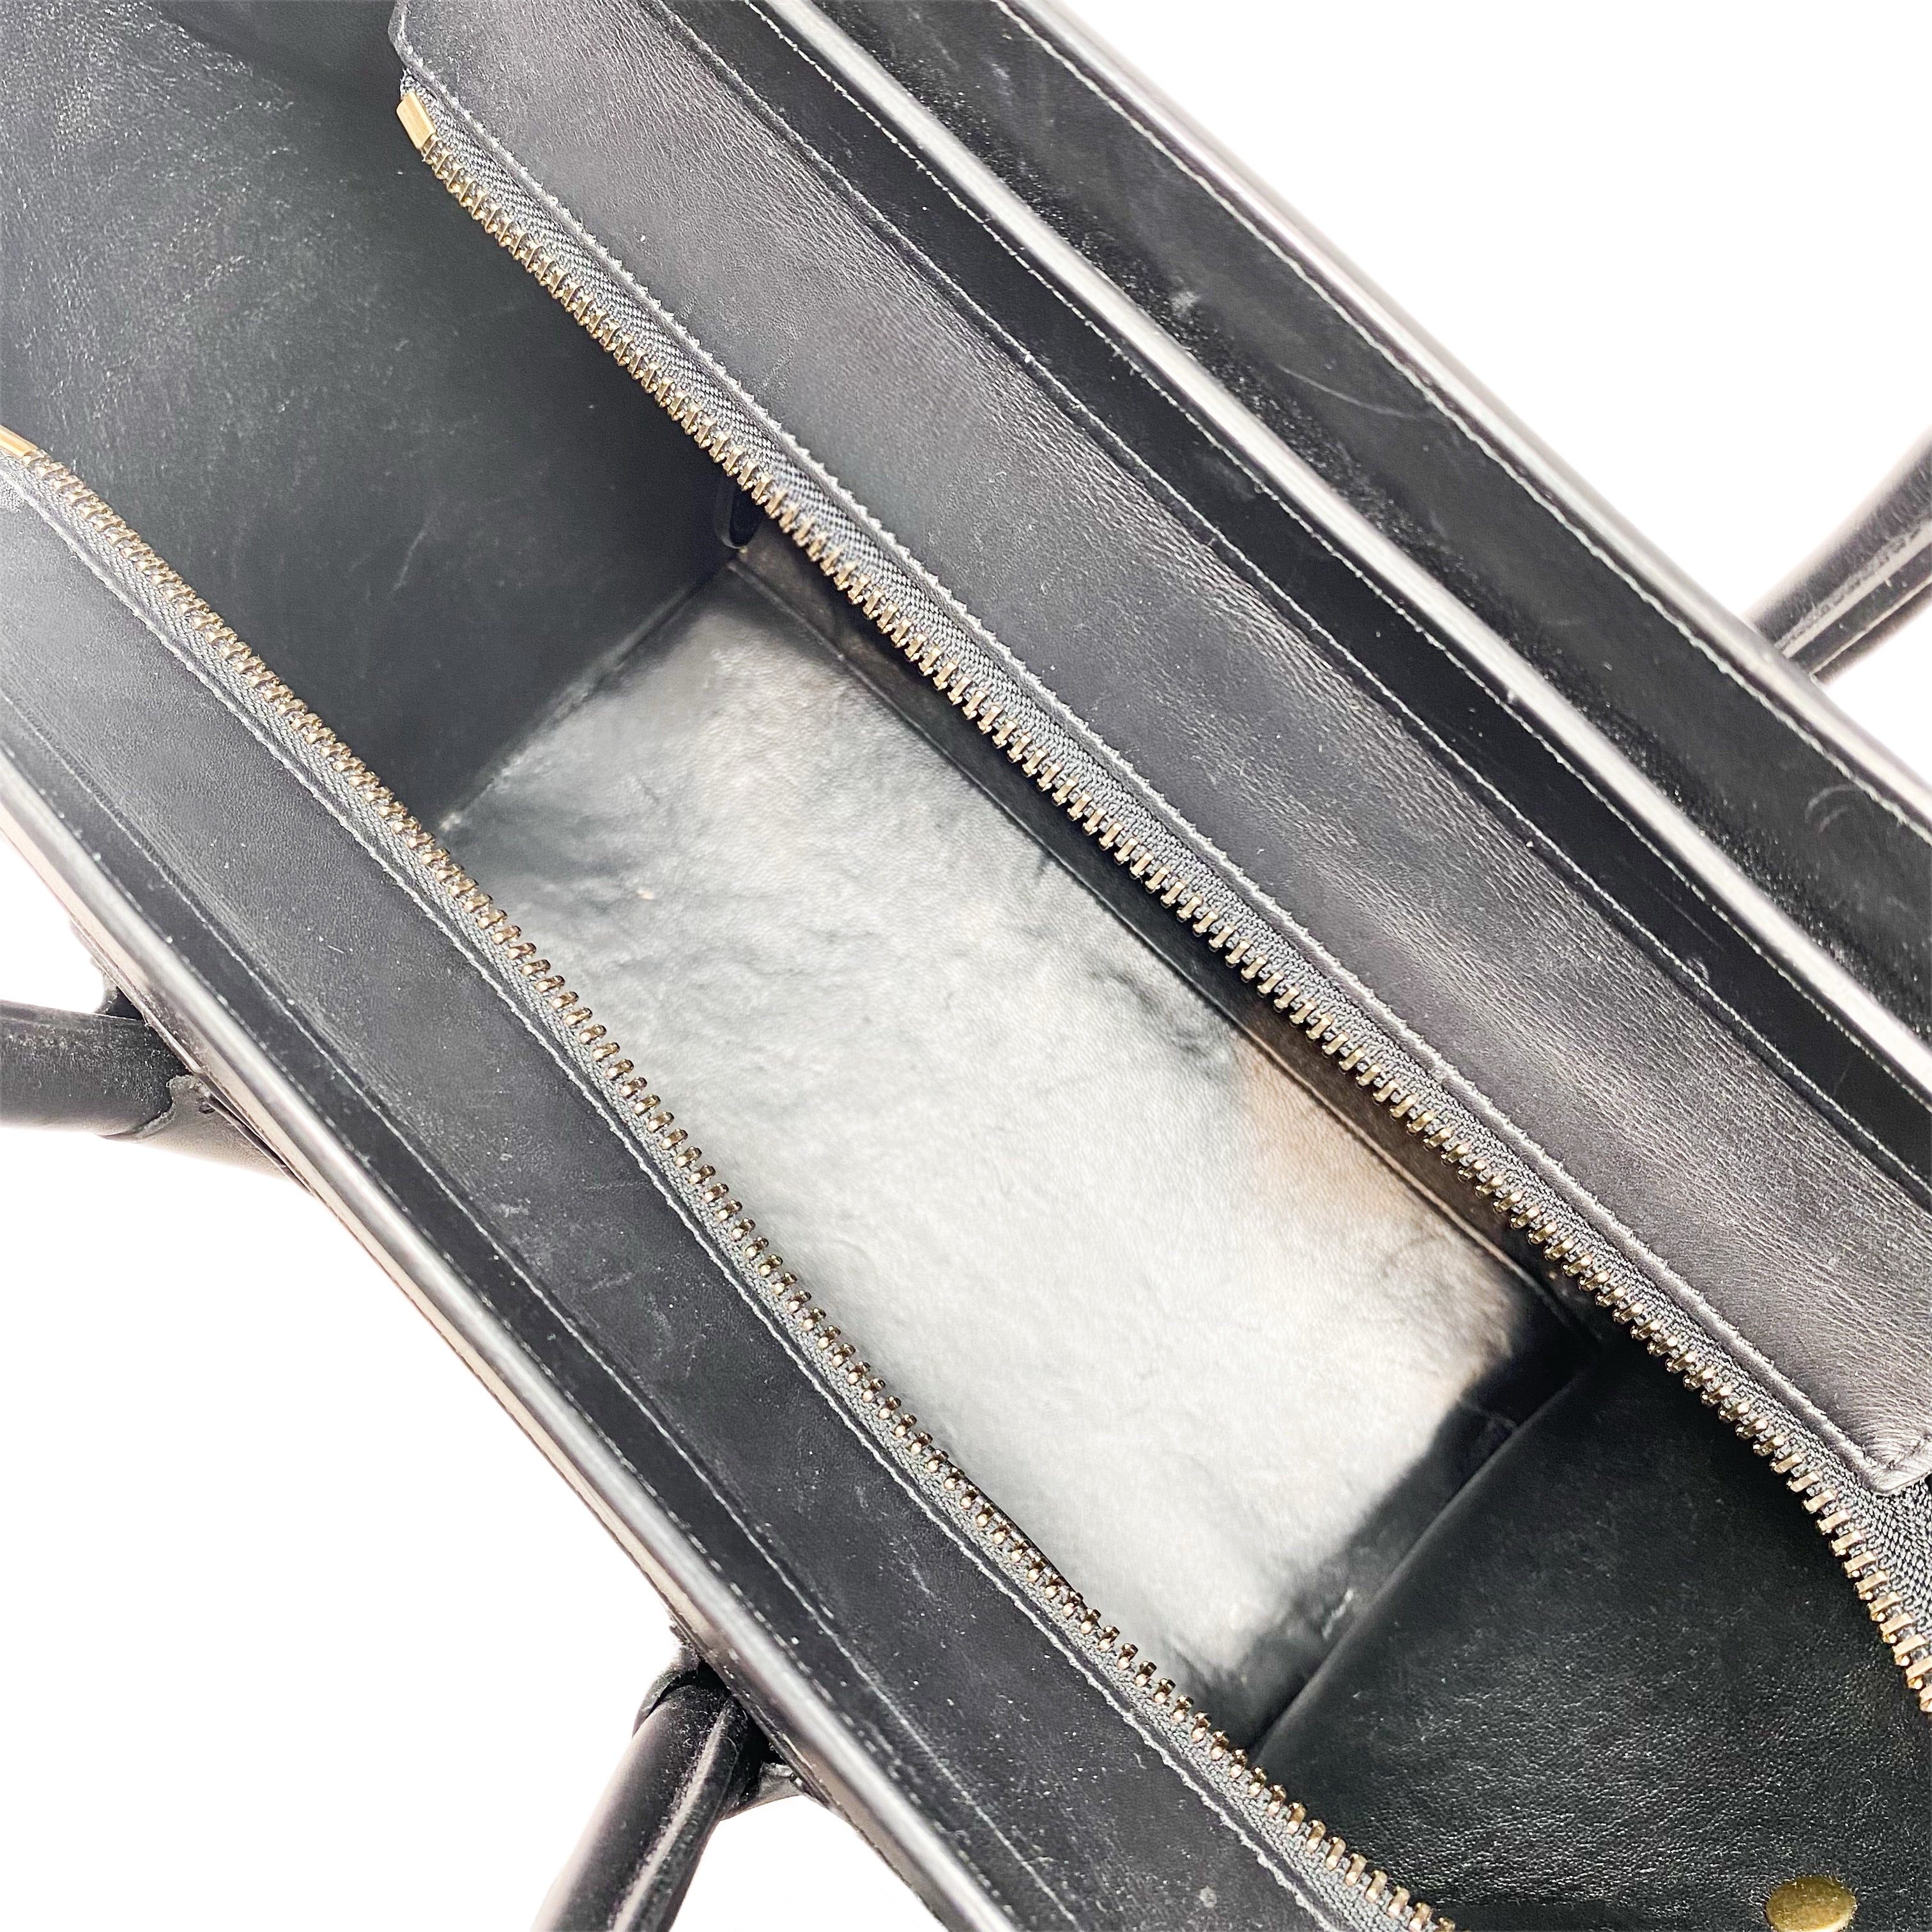 Celine Tricolor Leather Luggage Tote